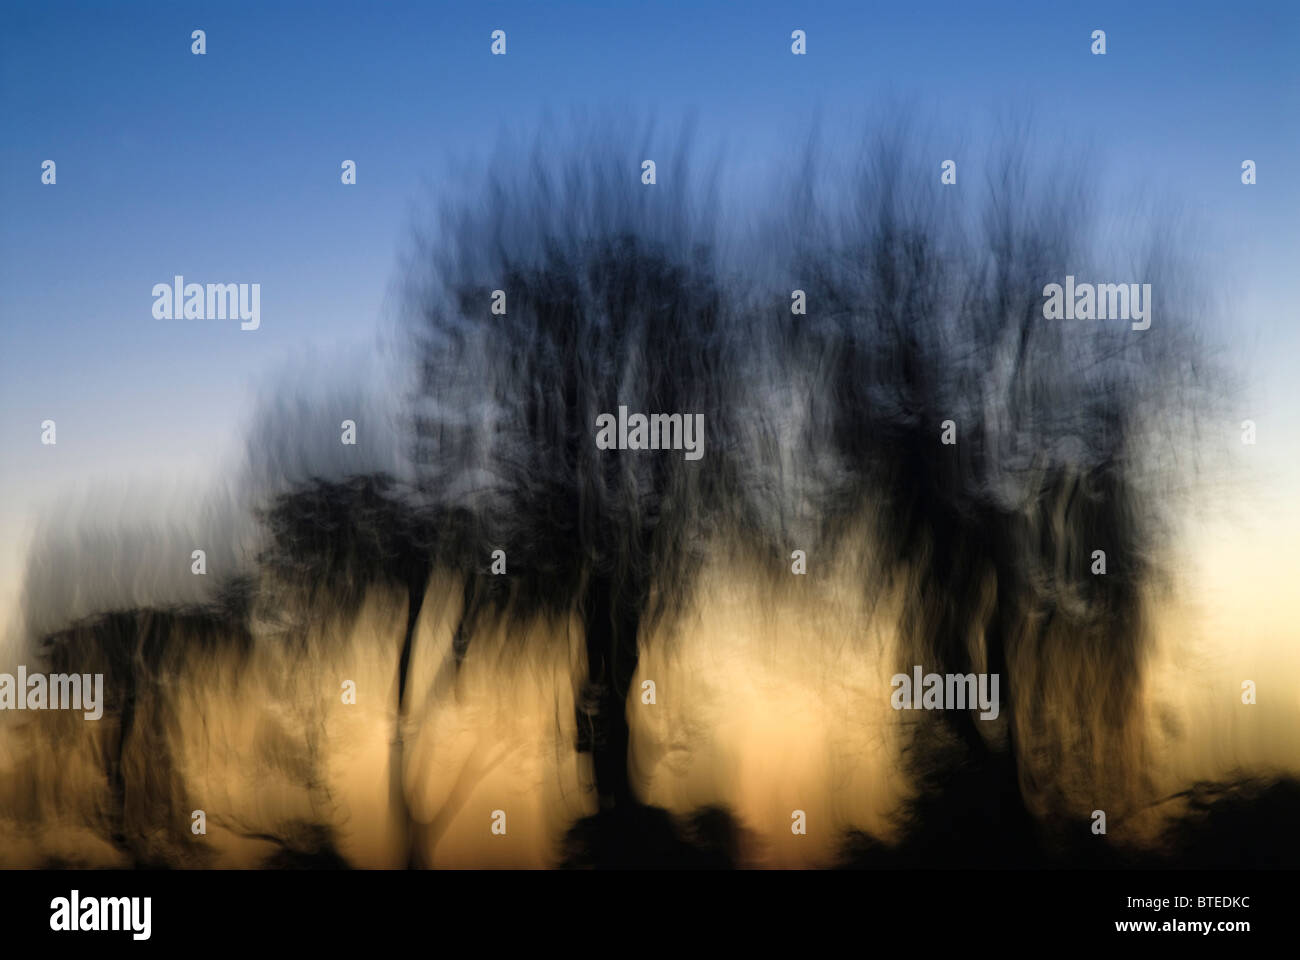 Abstract image of trees on the skyline at dusk Stock Photo